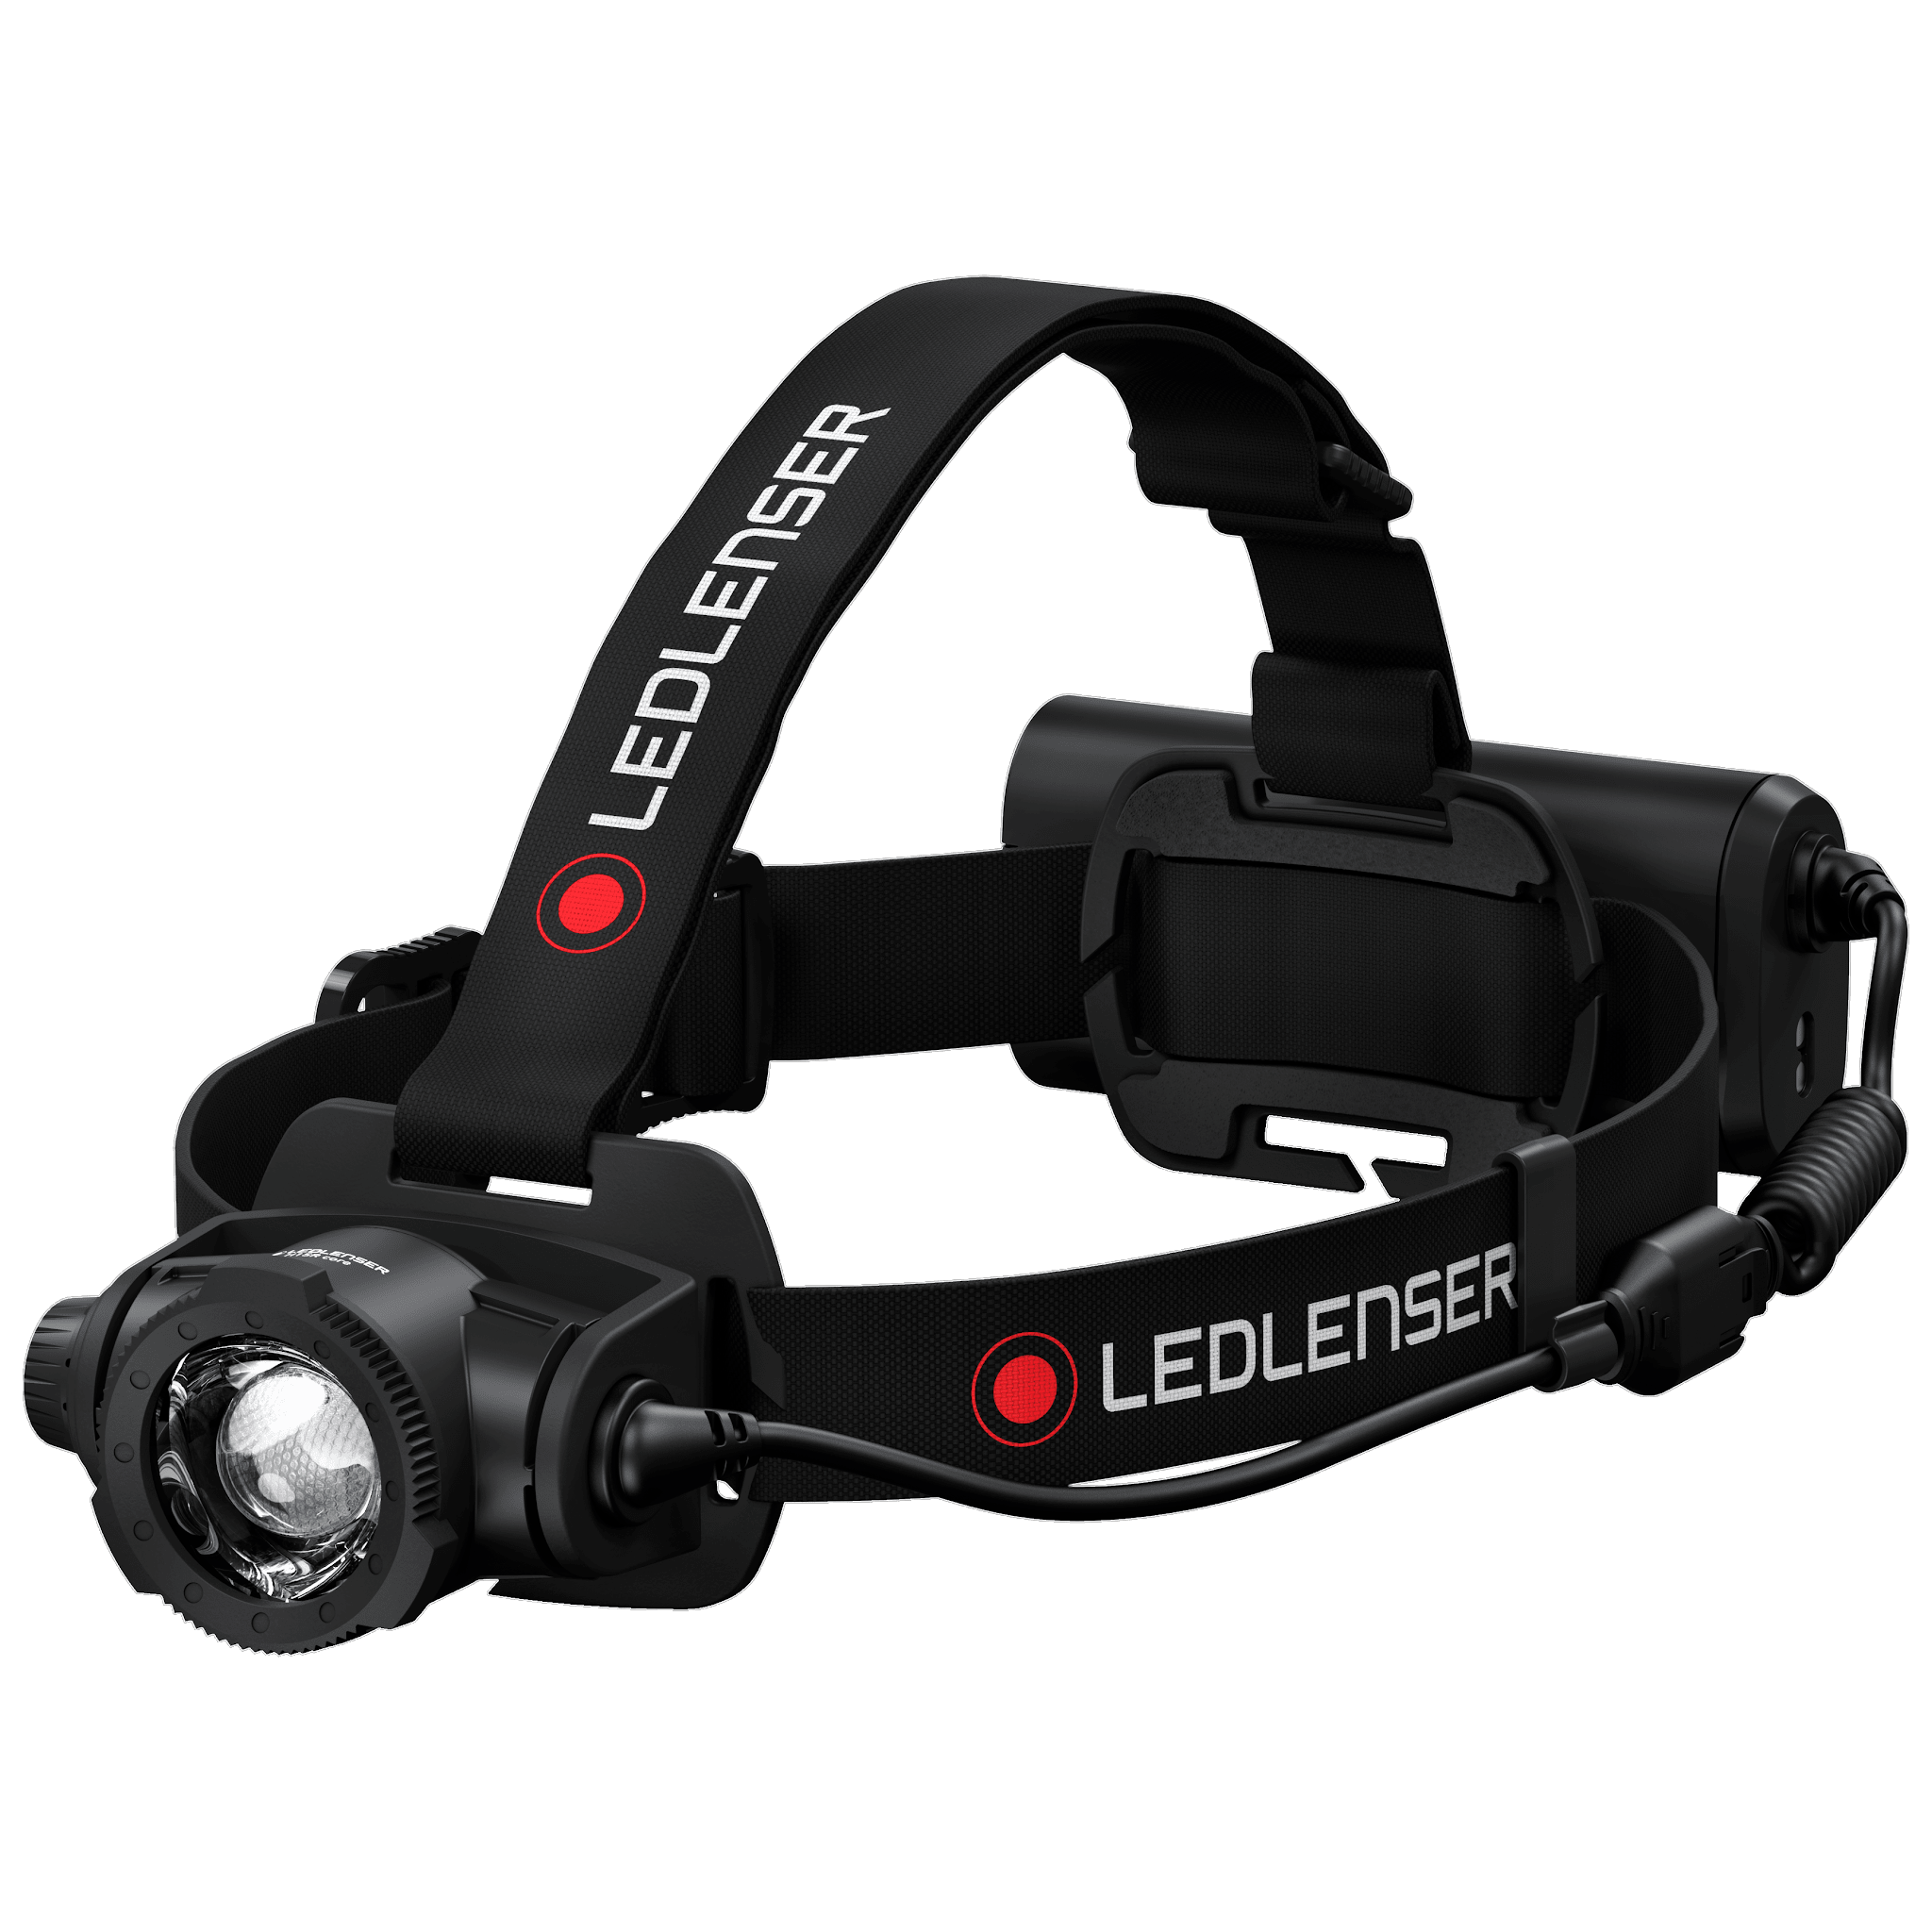 Torche frontale LED Free-headlight compacte